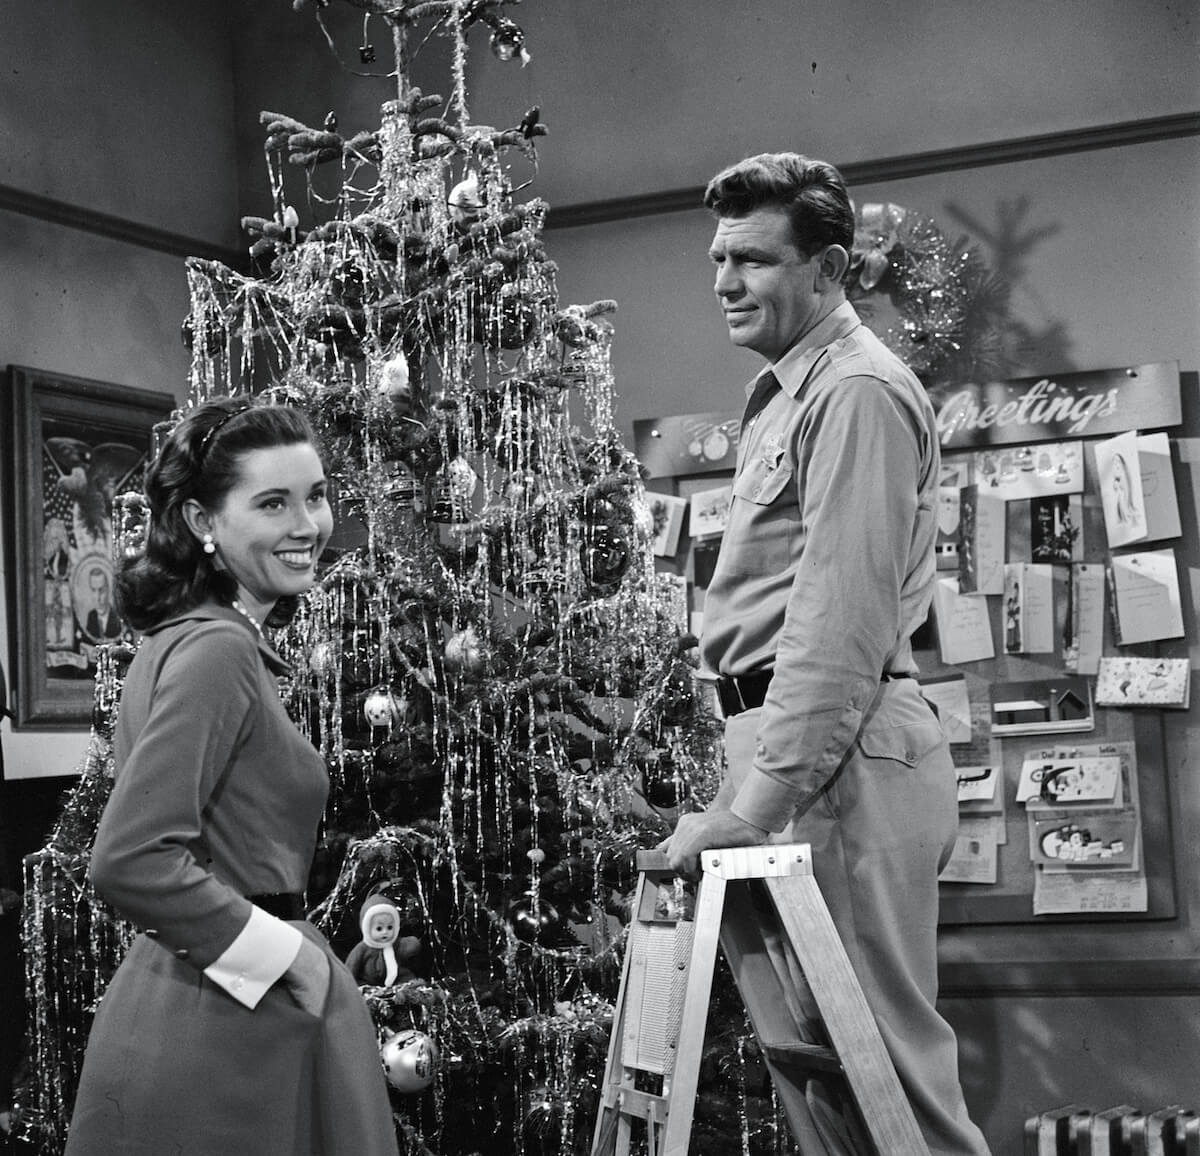 Andy and Ellie decorating a Christmas tree in 'The Andy Griffith Show'